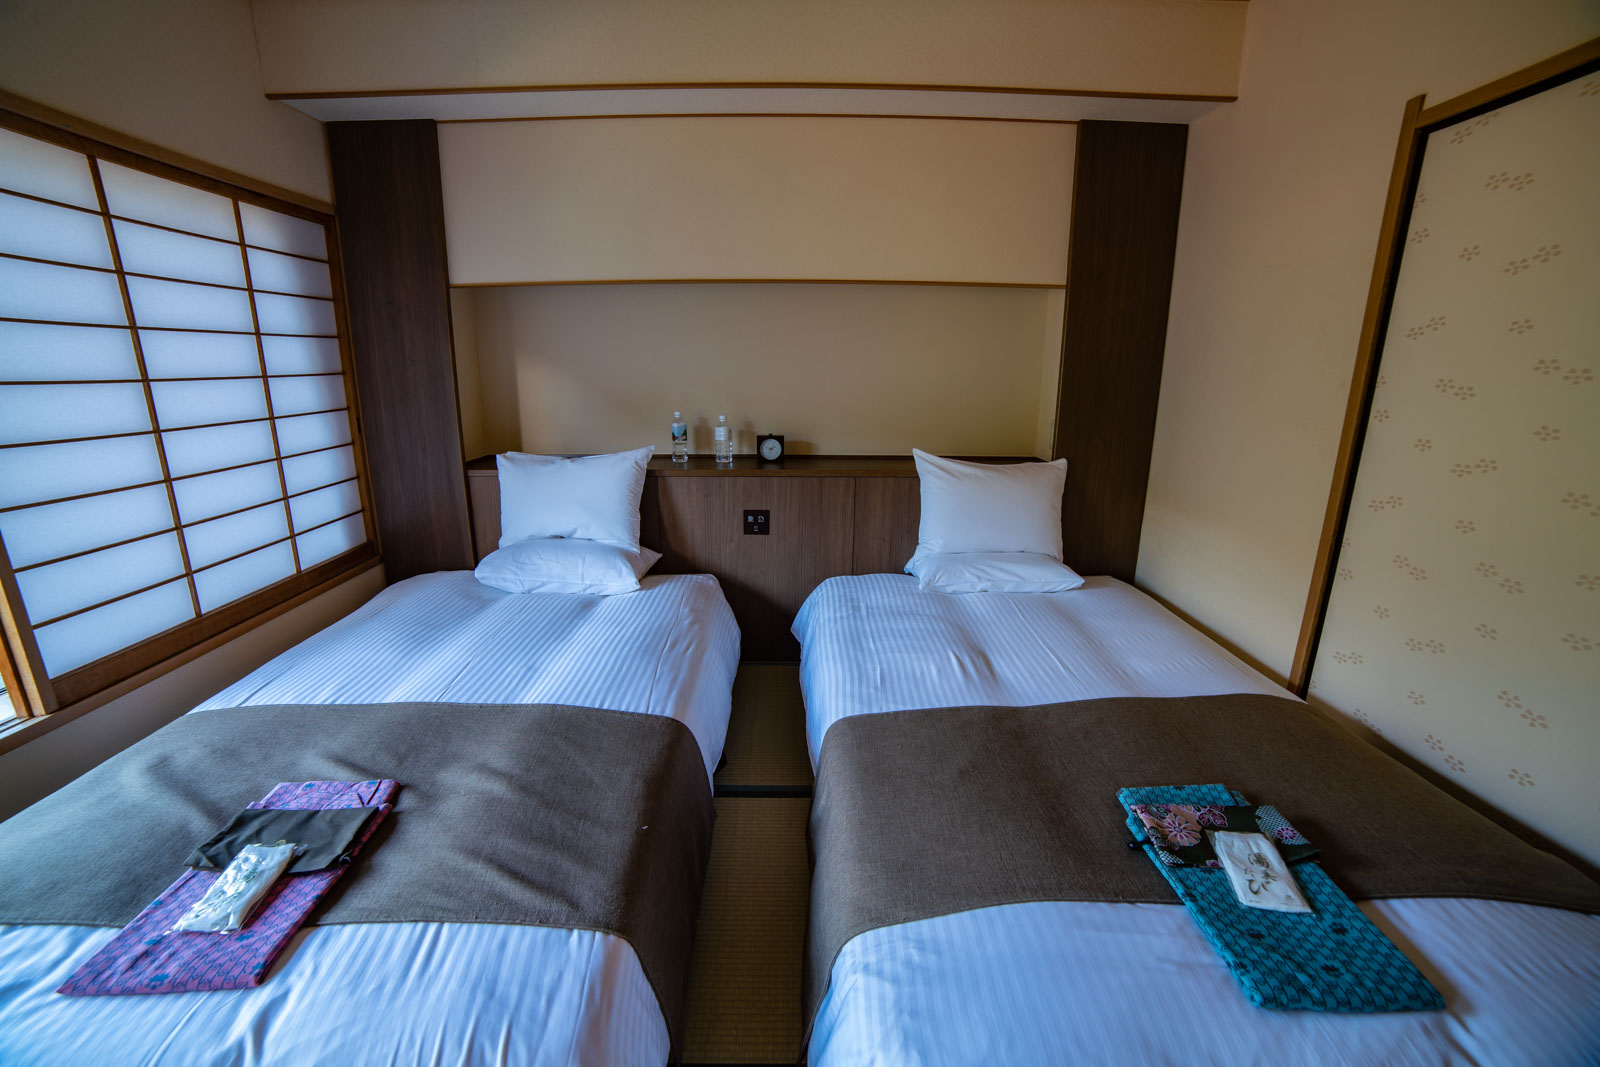 Accommodation costs in japan